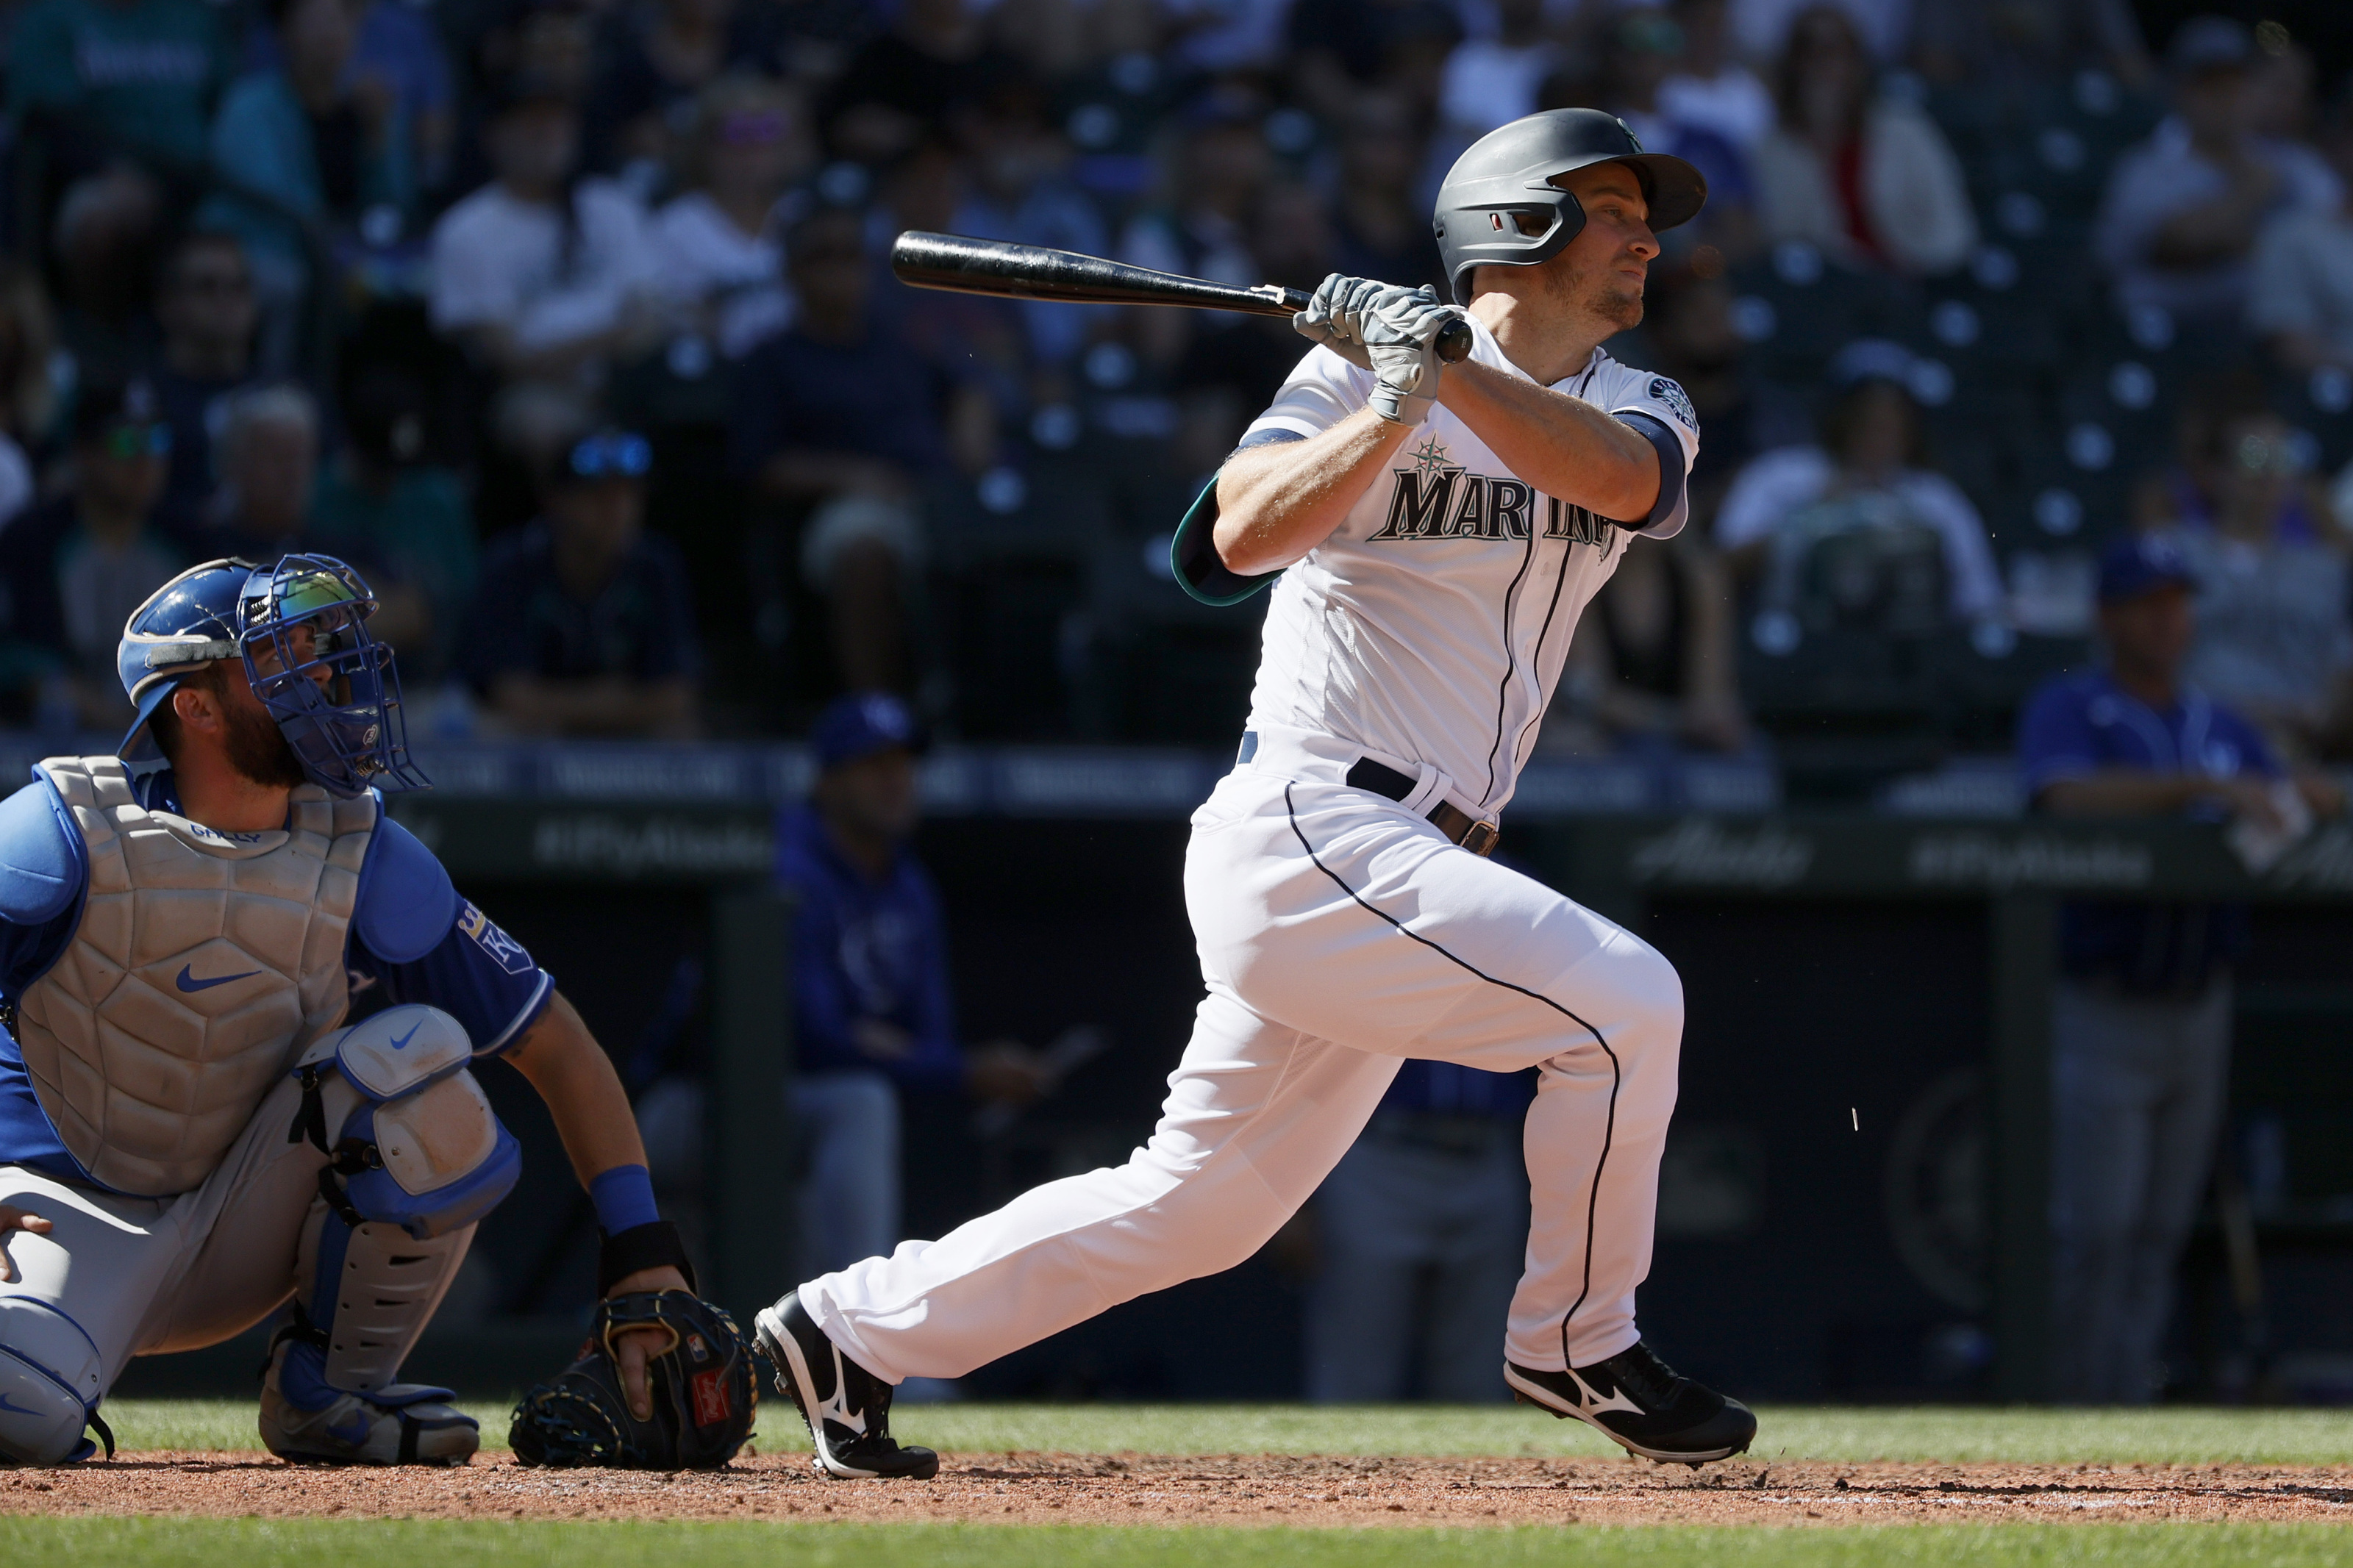 UNC Baseball: Kyle Seager hits career-best 31st home run